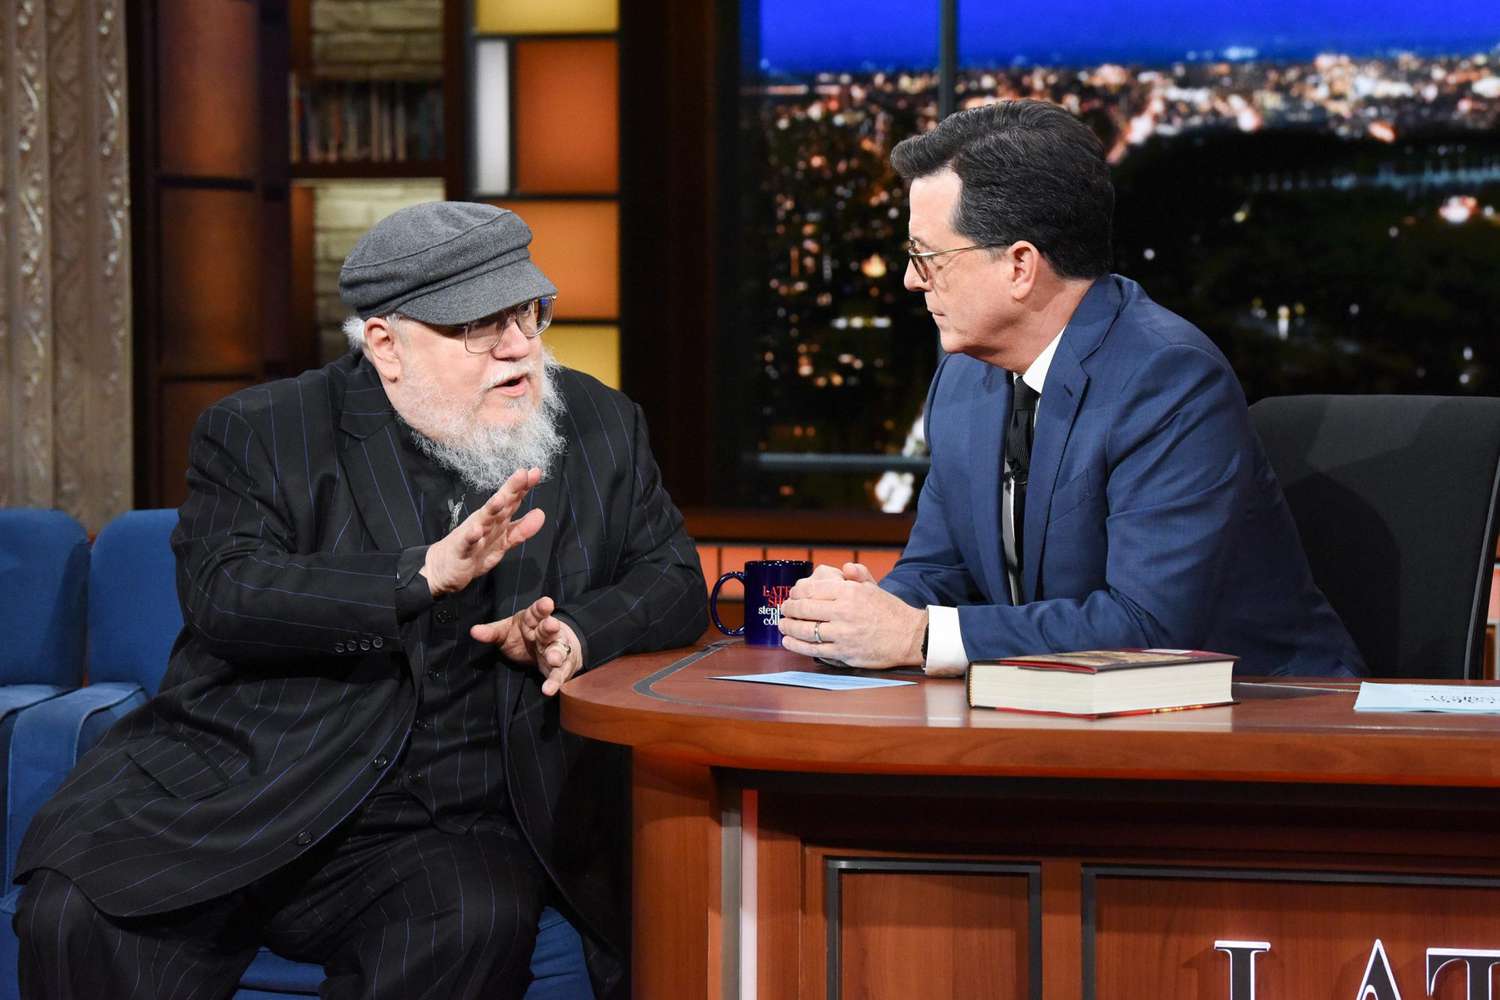 George R.R. Martin on The Late Show with Stephen Colbert